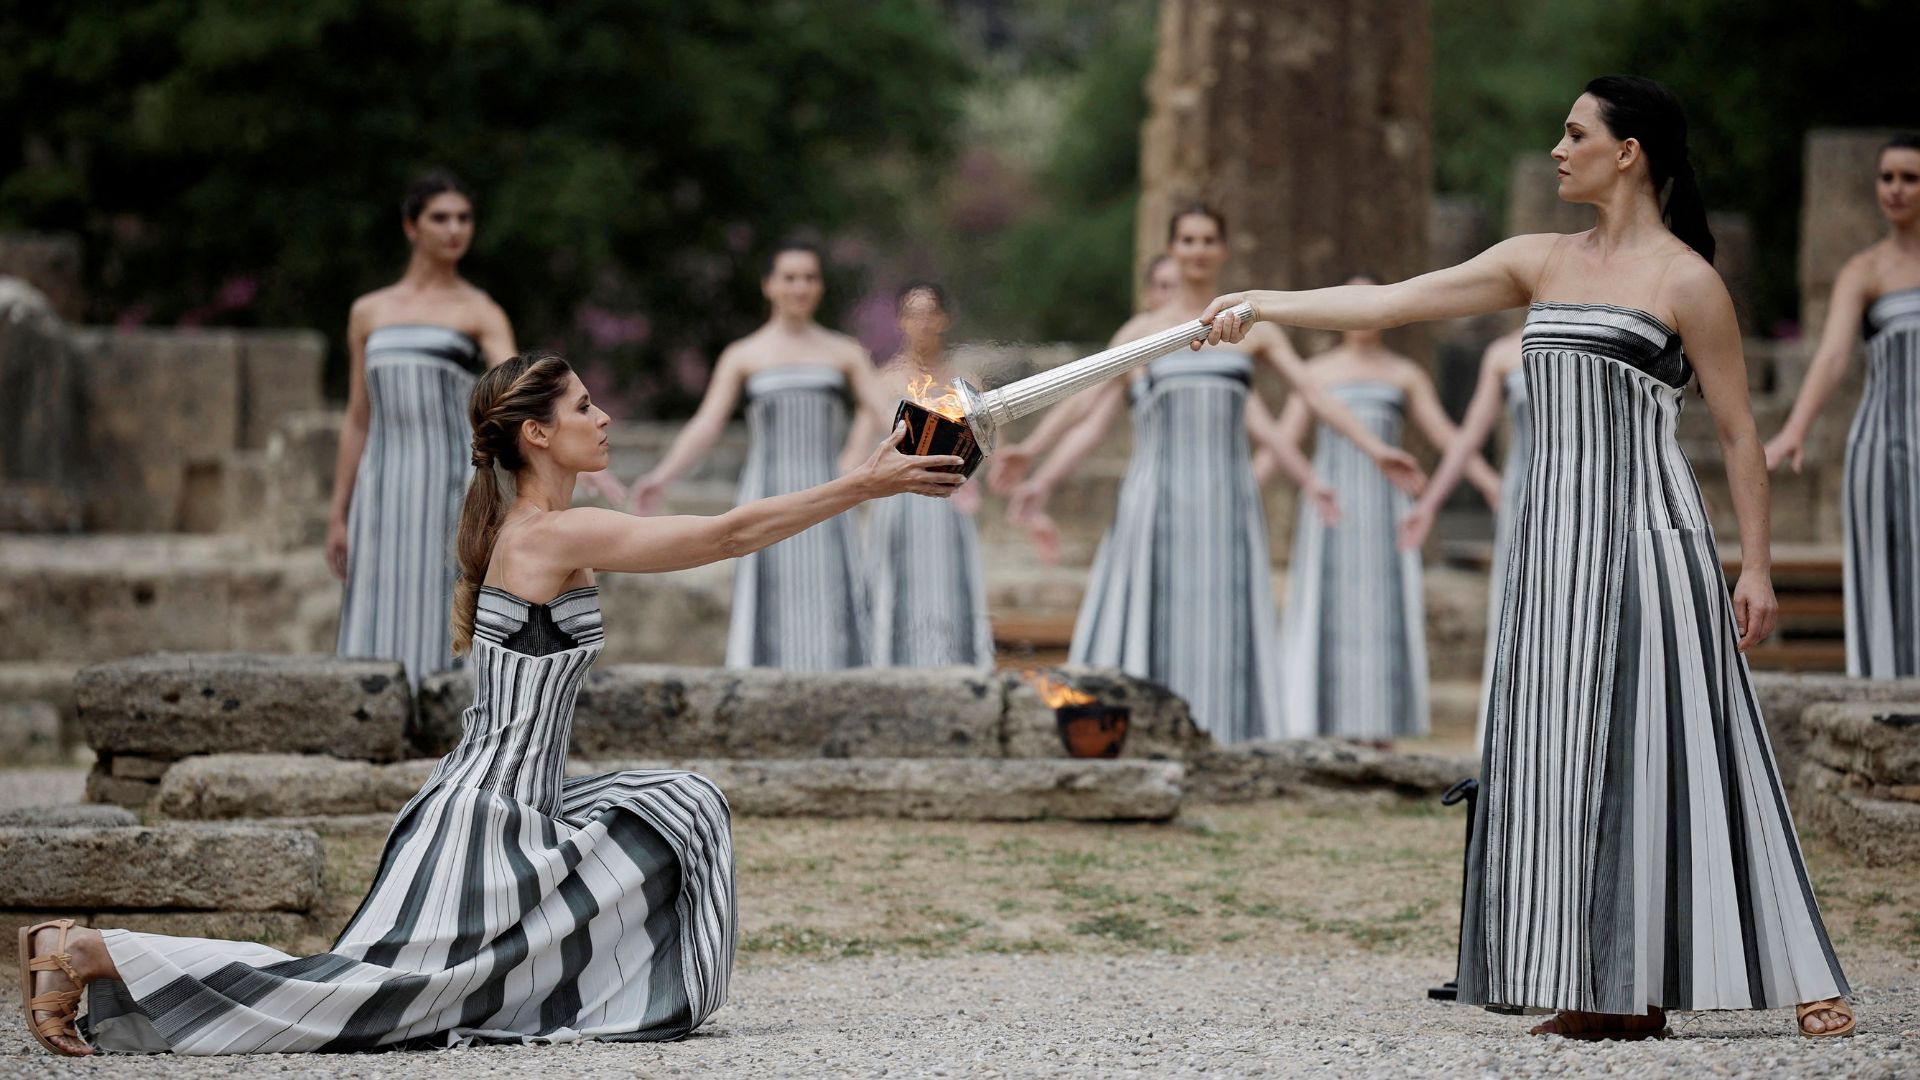 Greek actress Mary Mina, playing the role of High Priestess, lights the flame during the Olympic Flame lighting ceremony for the Paris 2024 Olympics. /Alkis Konstantinidis/Reuters